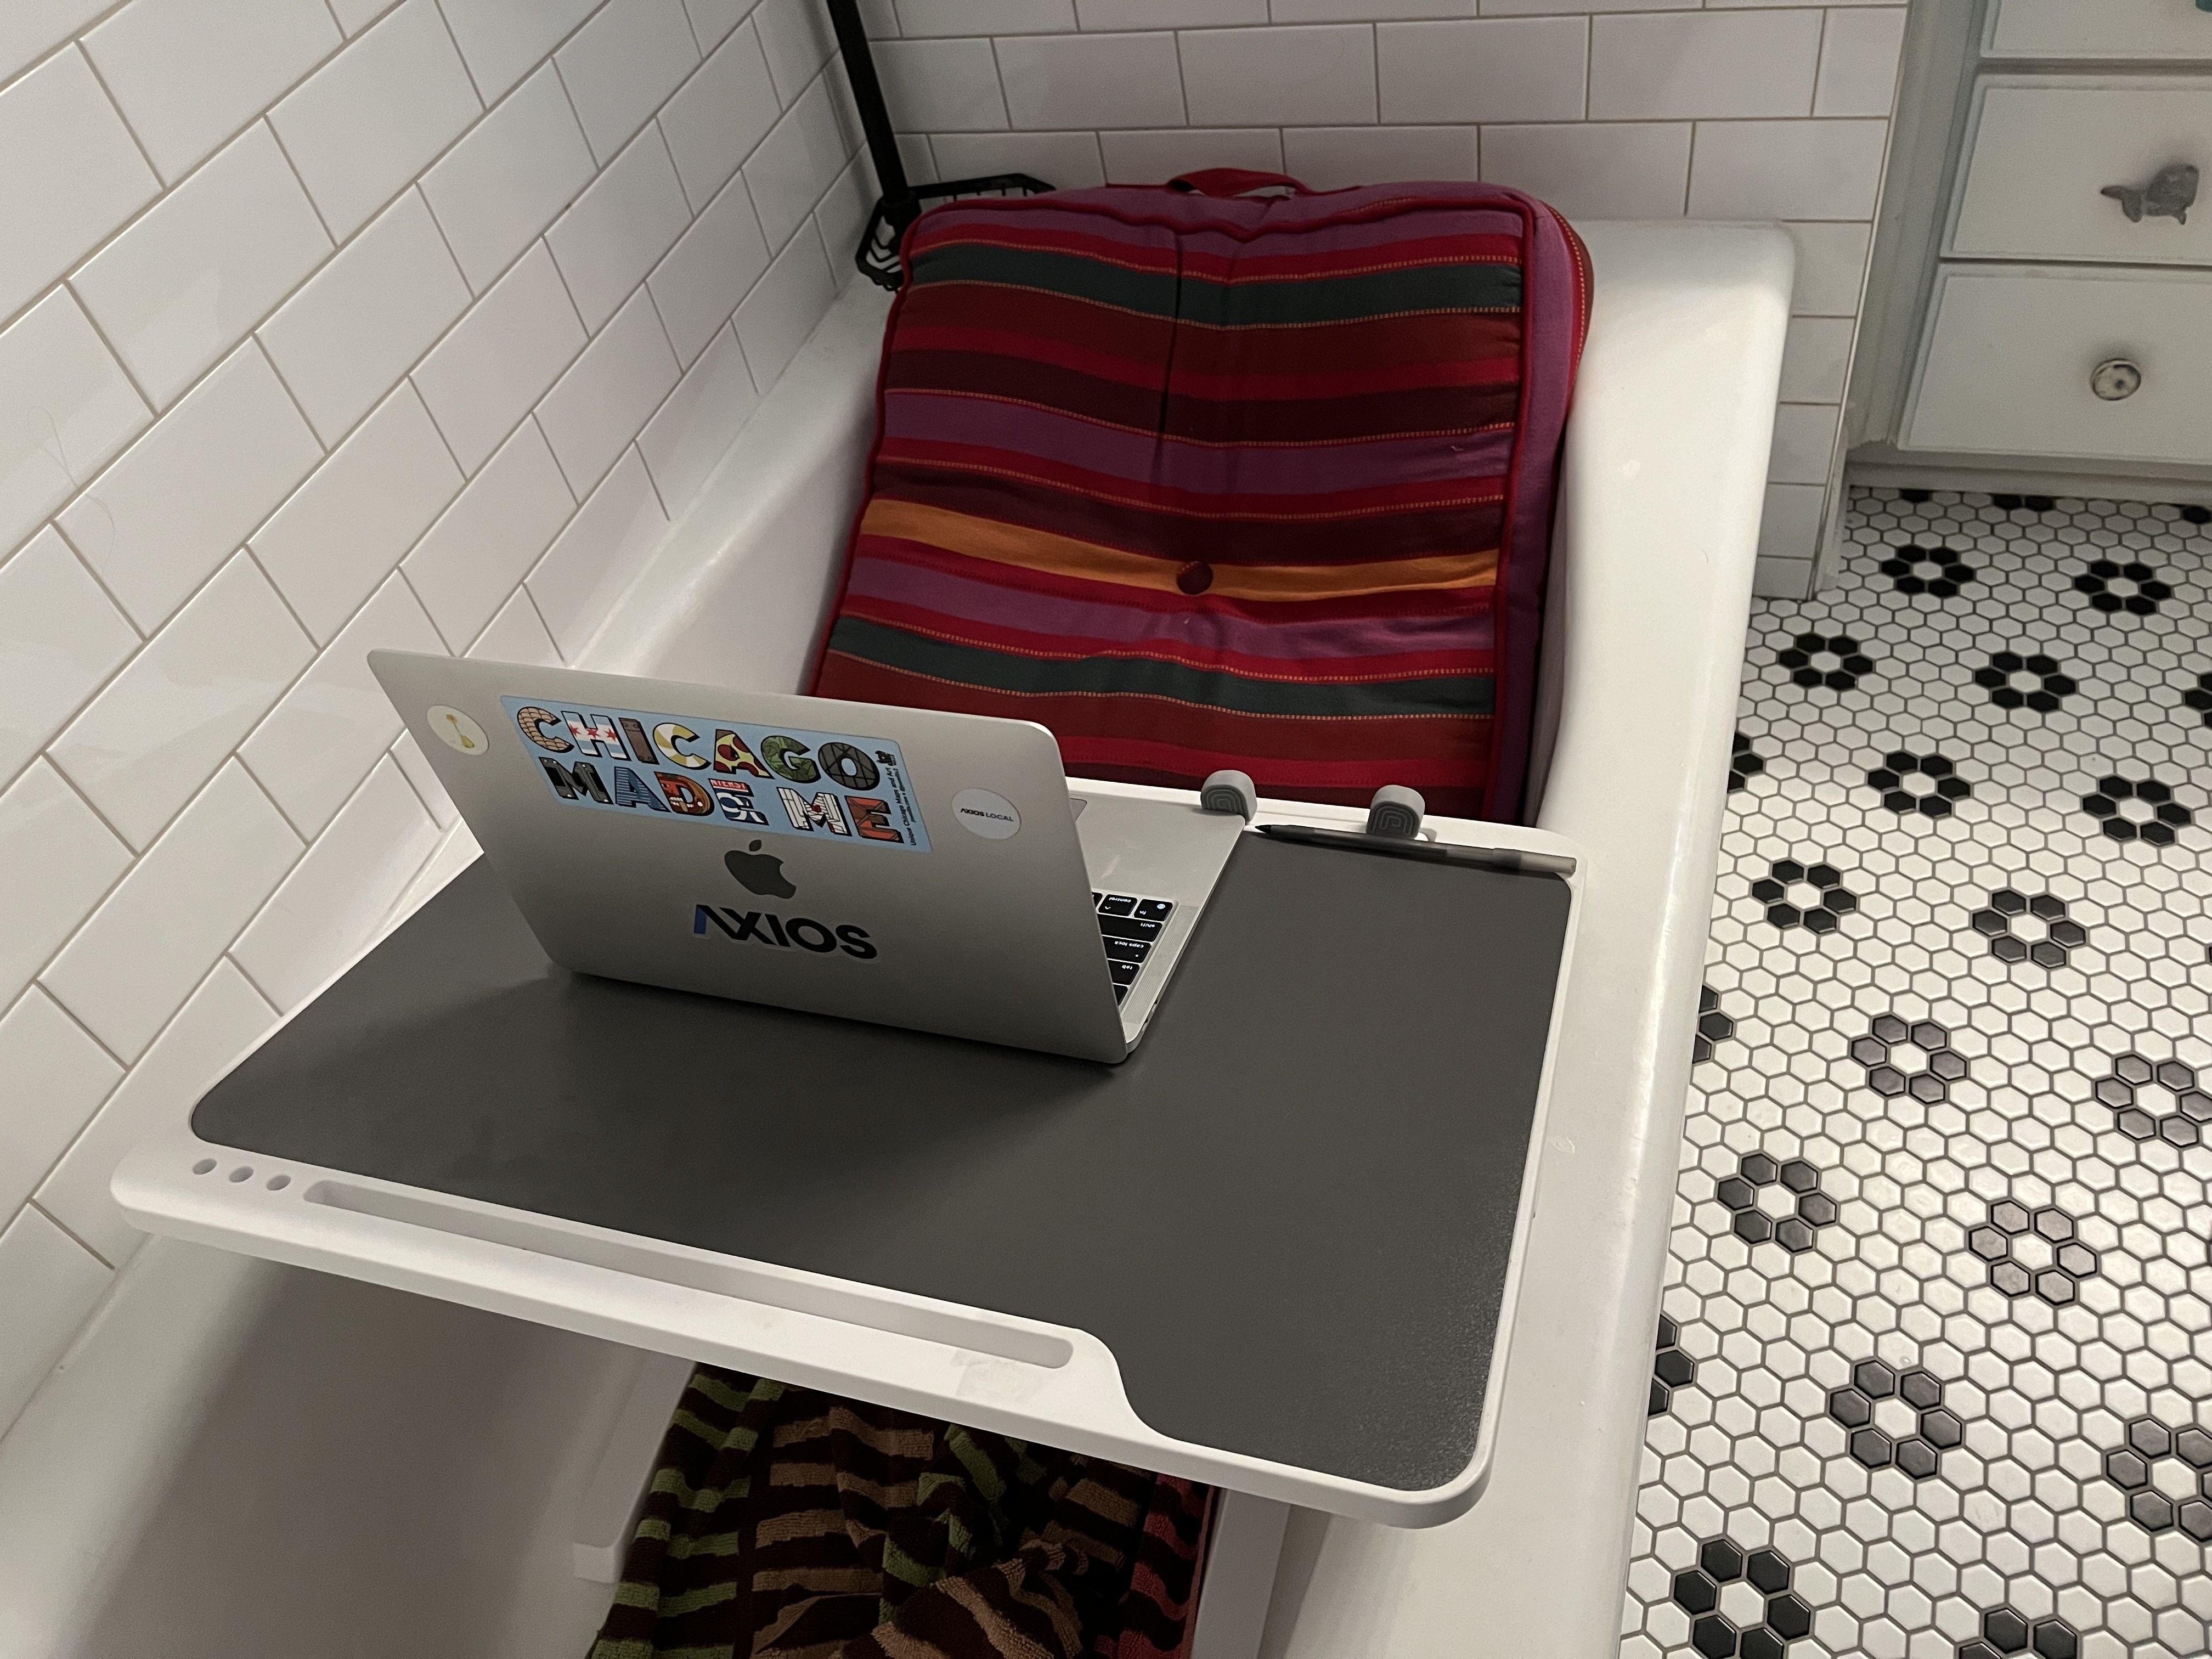 Photo of a bathtub with a computer 